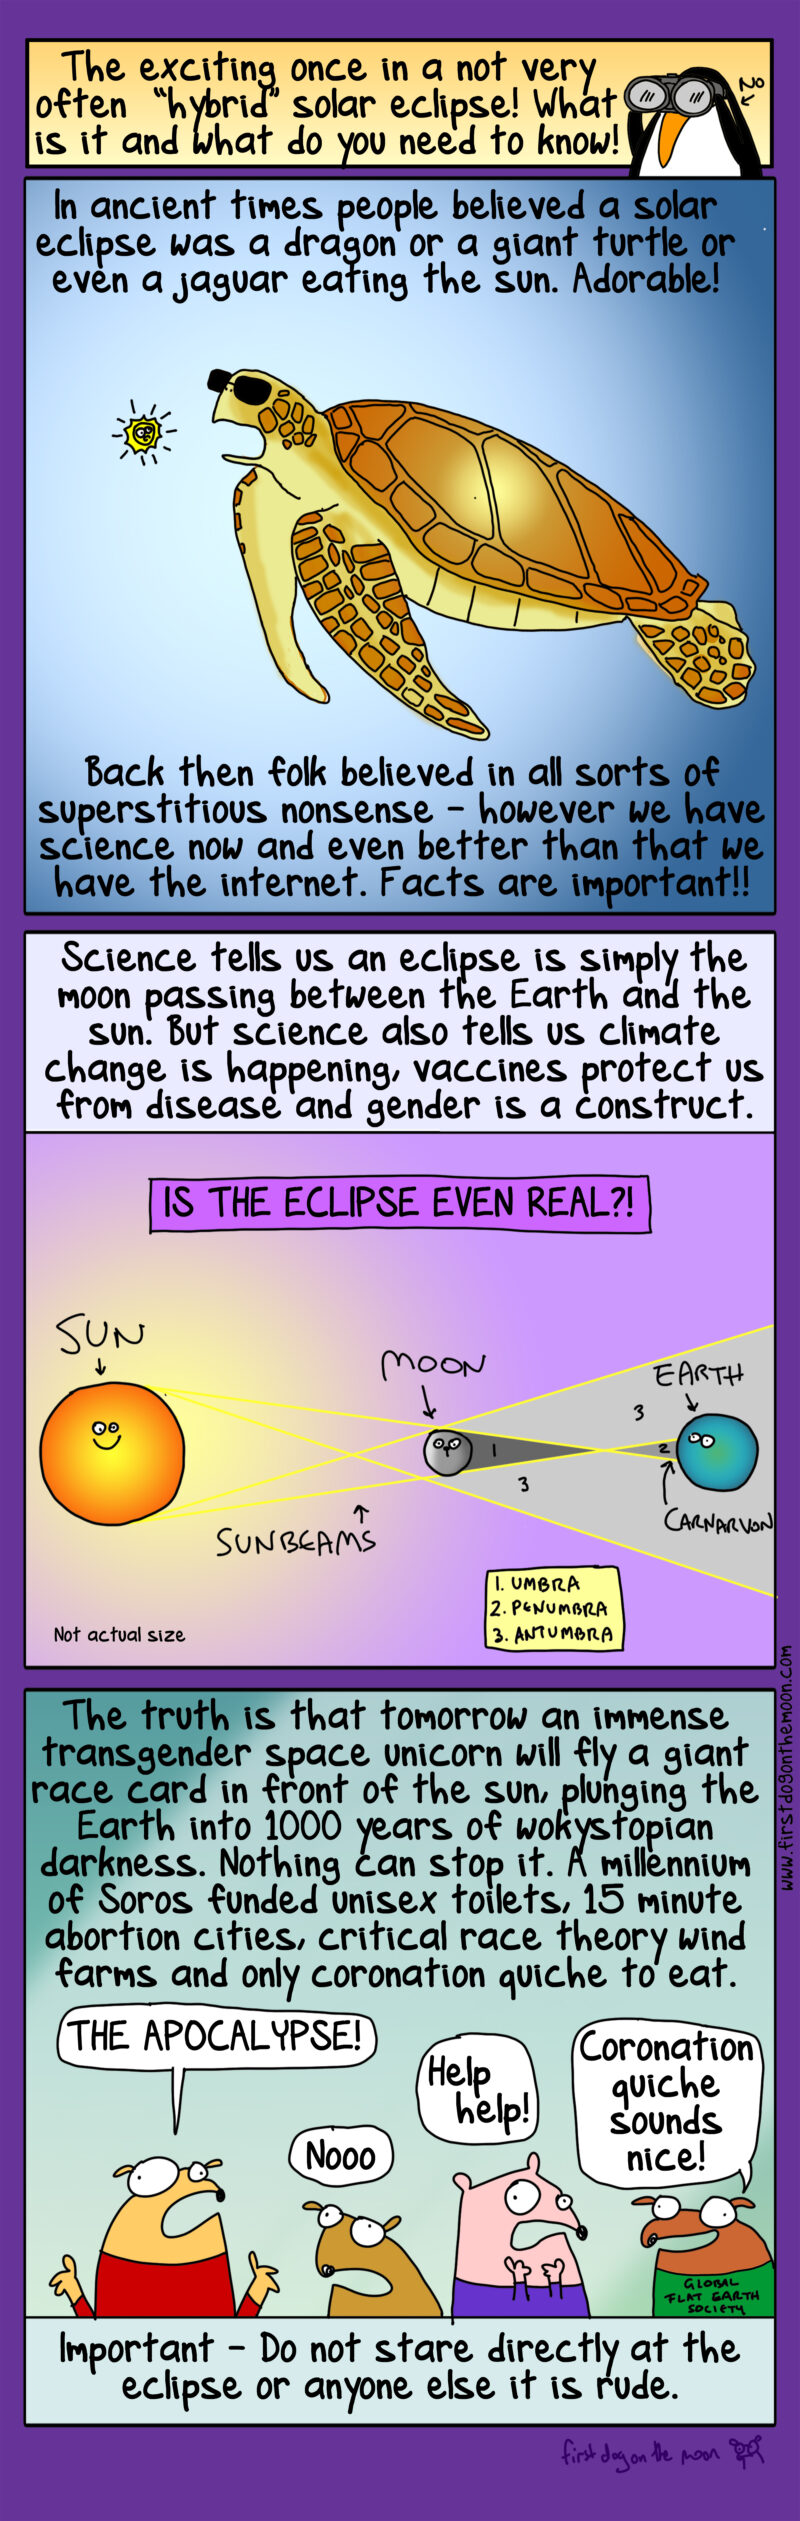 Is the eclipse even real?! Let’s ask science